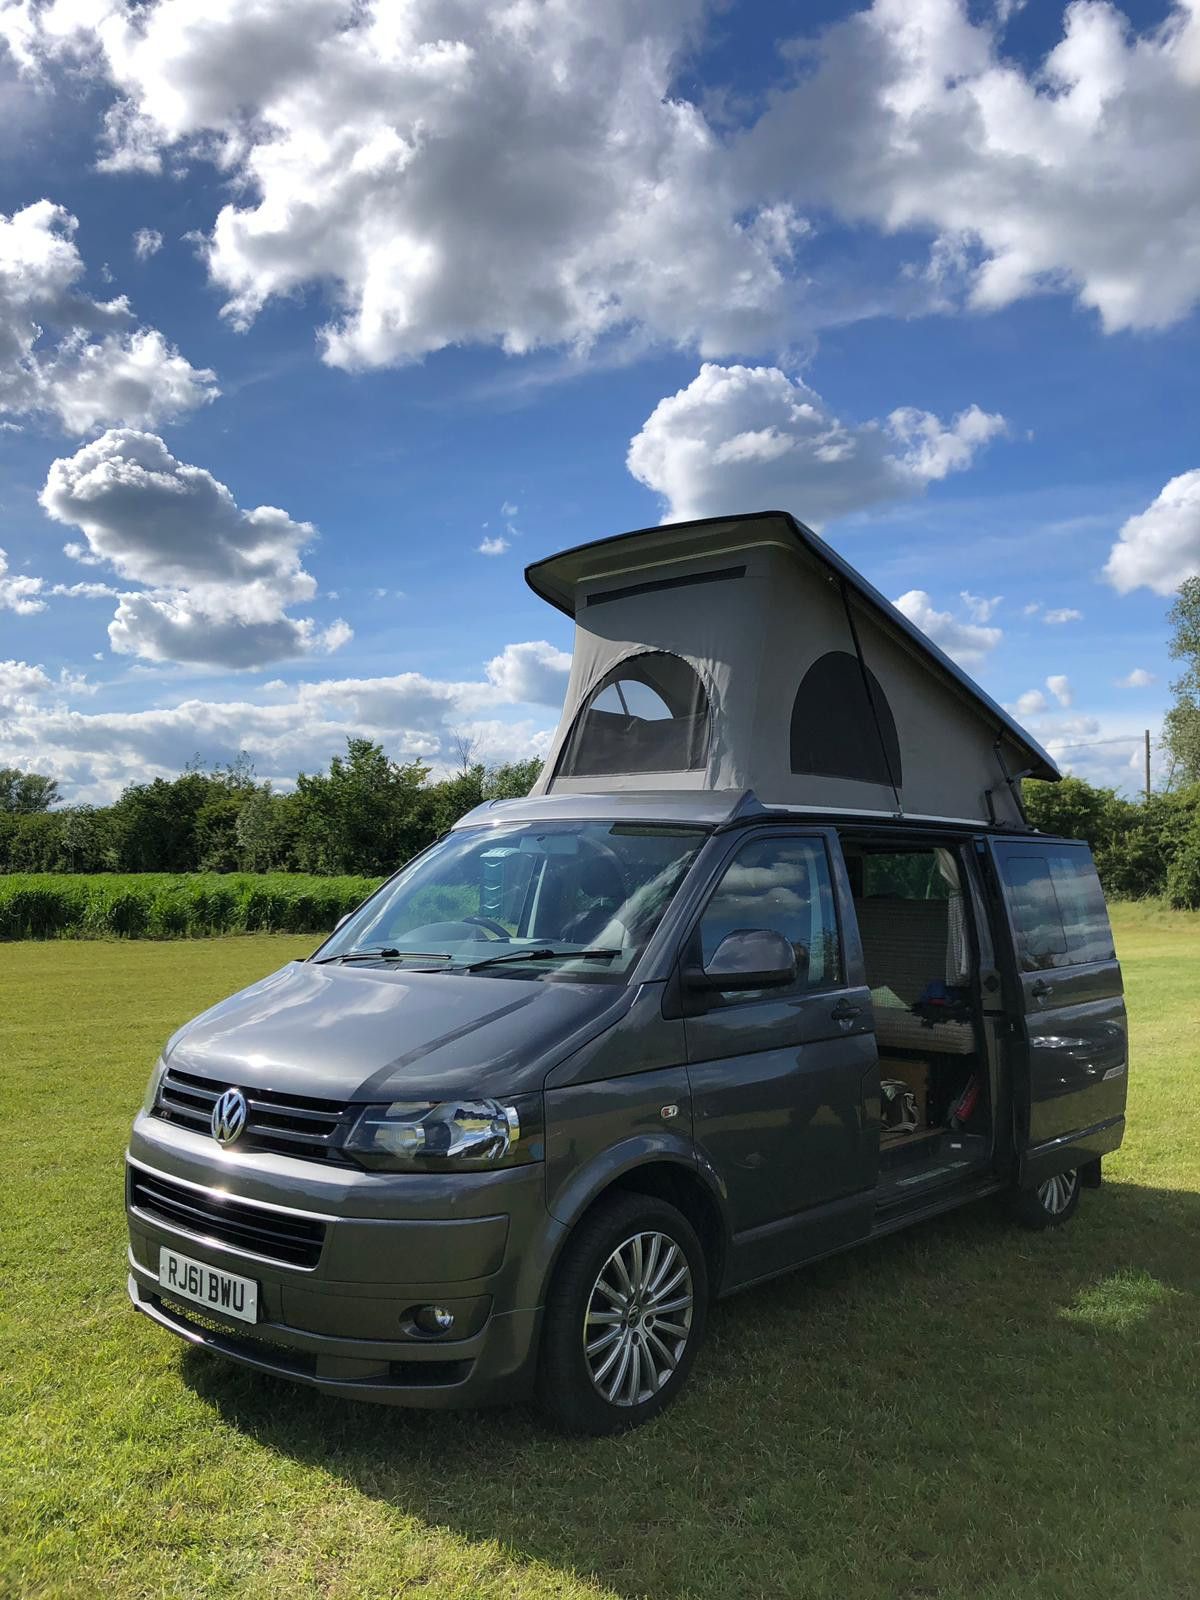 A VW T5 Campervan called Bubba and on-site, rood popped and setup in less than 5 minutes, ready to relax for hire in Surrey, Surrey